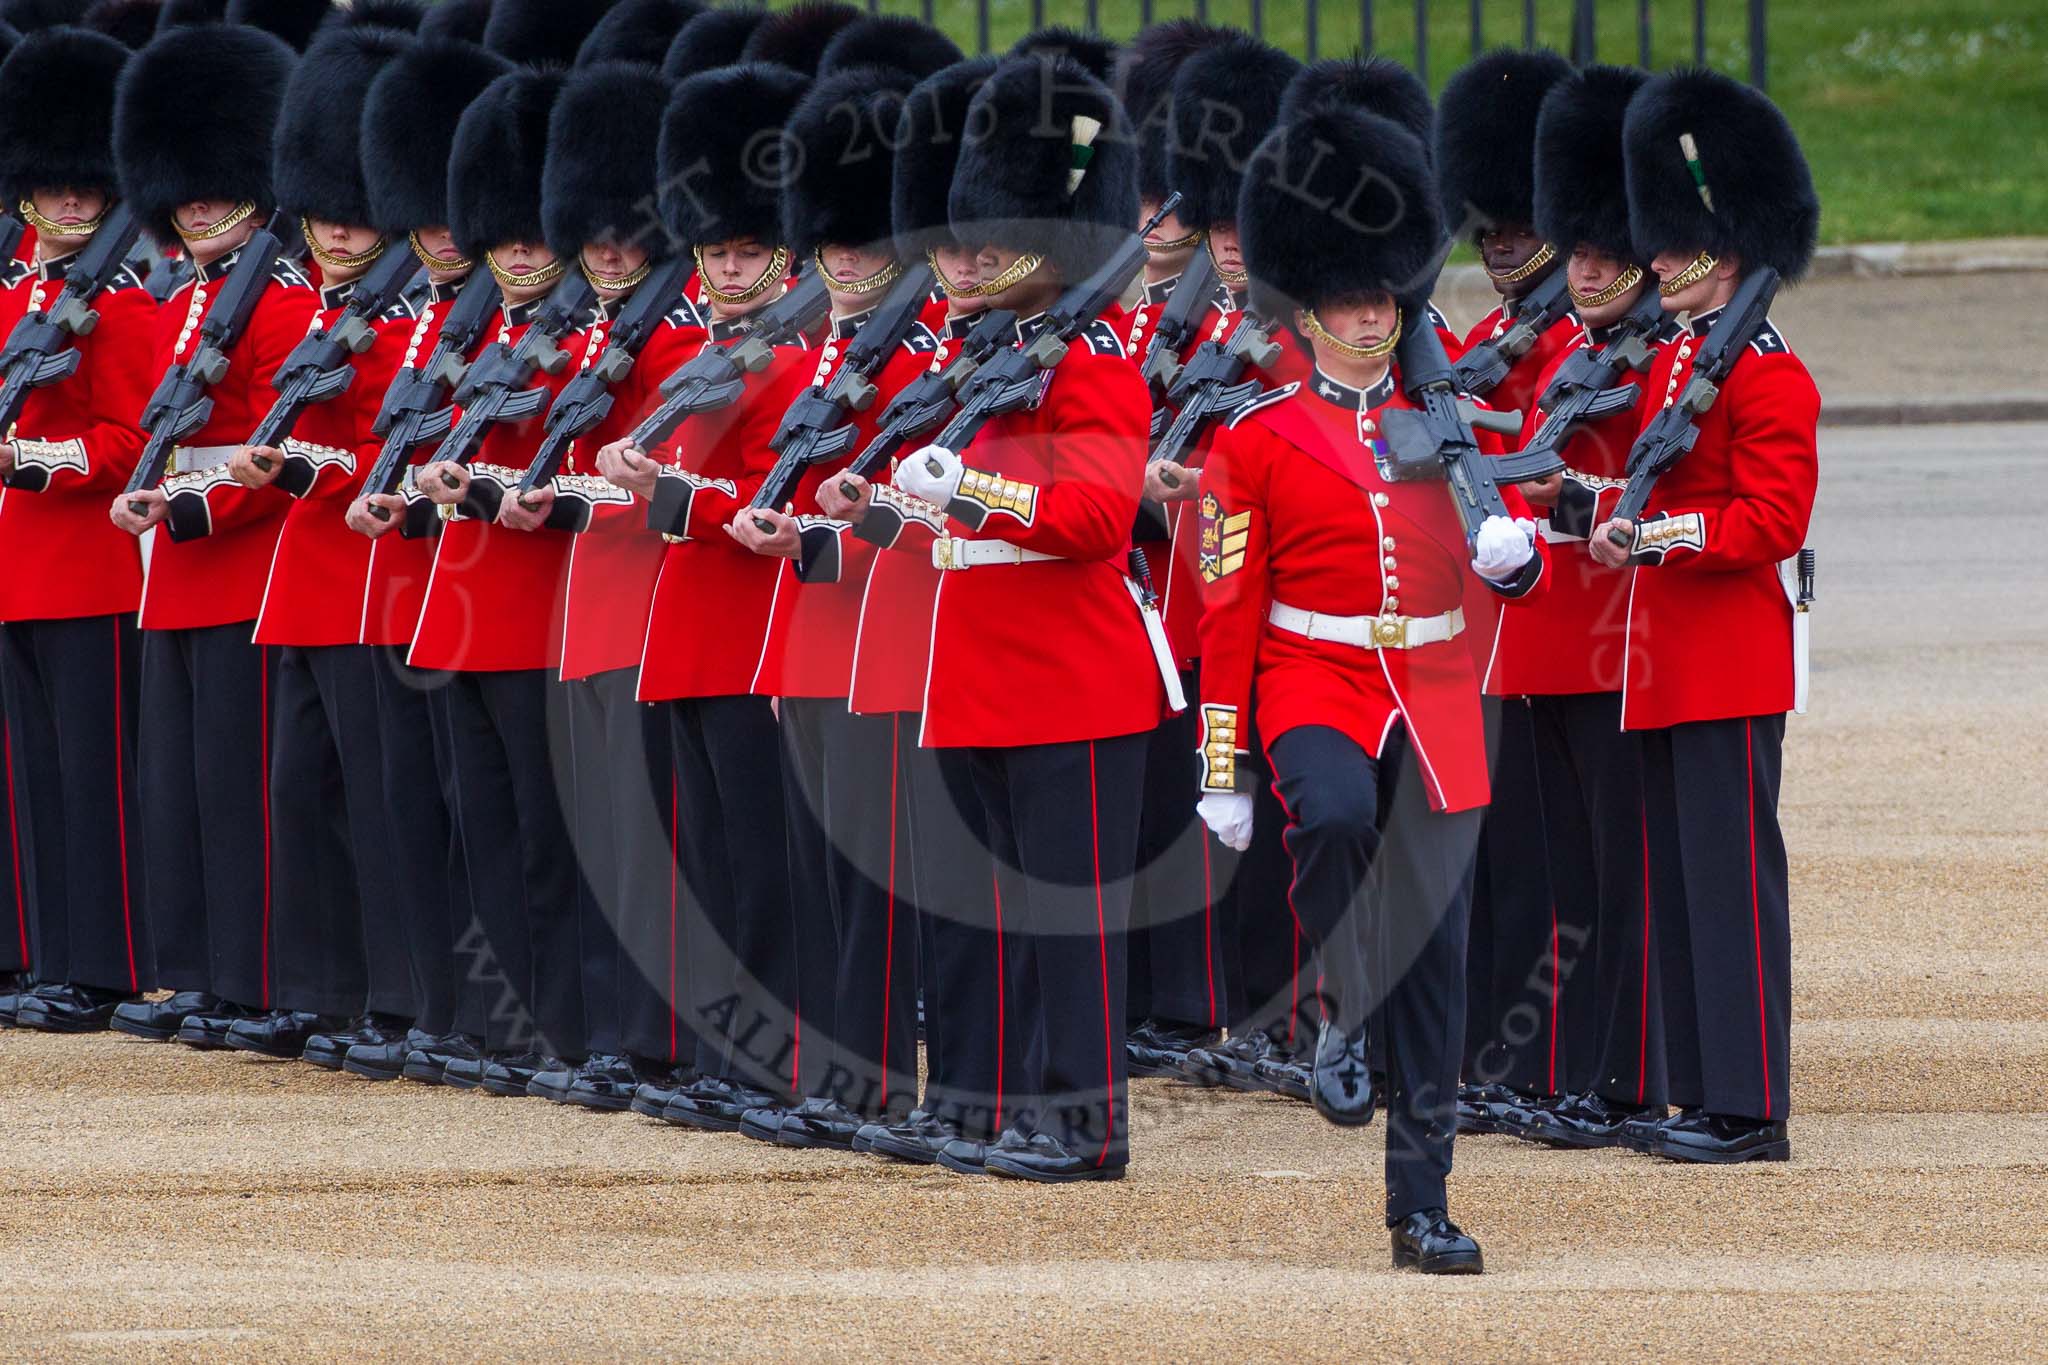 Major General's Review 2013: Colour Sergeant D S Morgan with No. 3 Guard,1st Battalion Welsh Guards..
Horse Guards Parade, Westminster,
London SW1,

United Kingdom,
on 01 June 2013 at 10:28, image #104